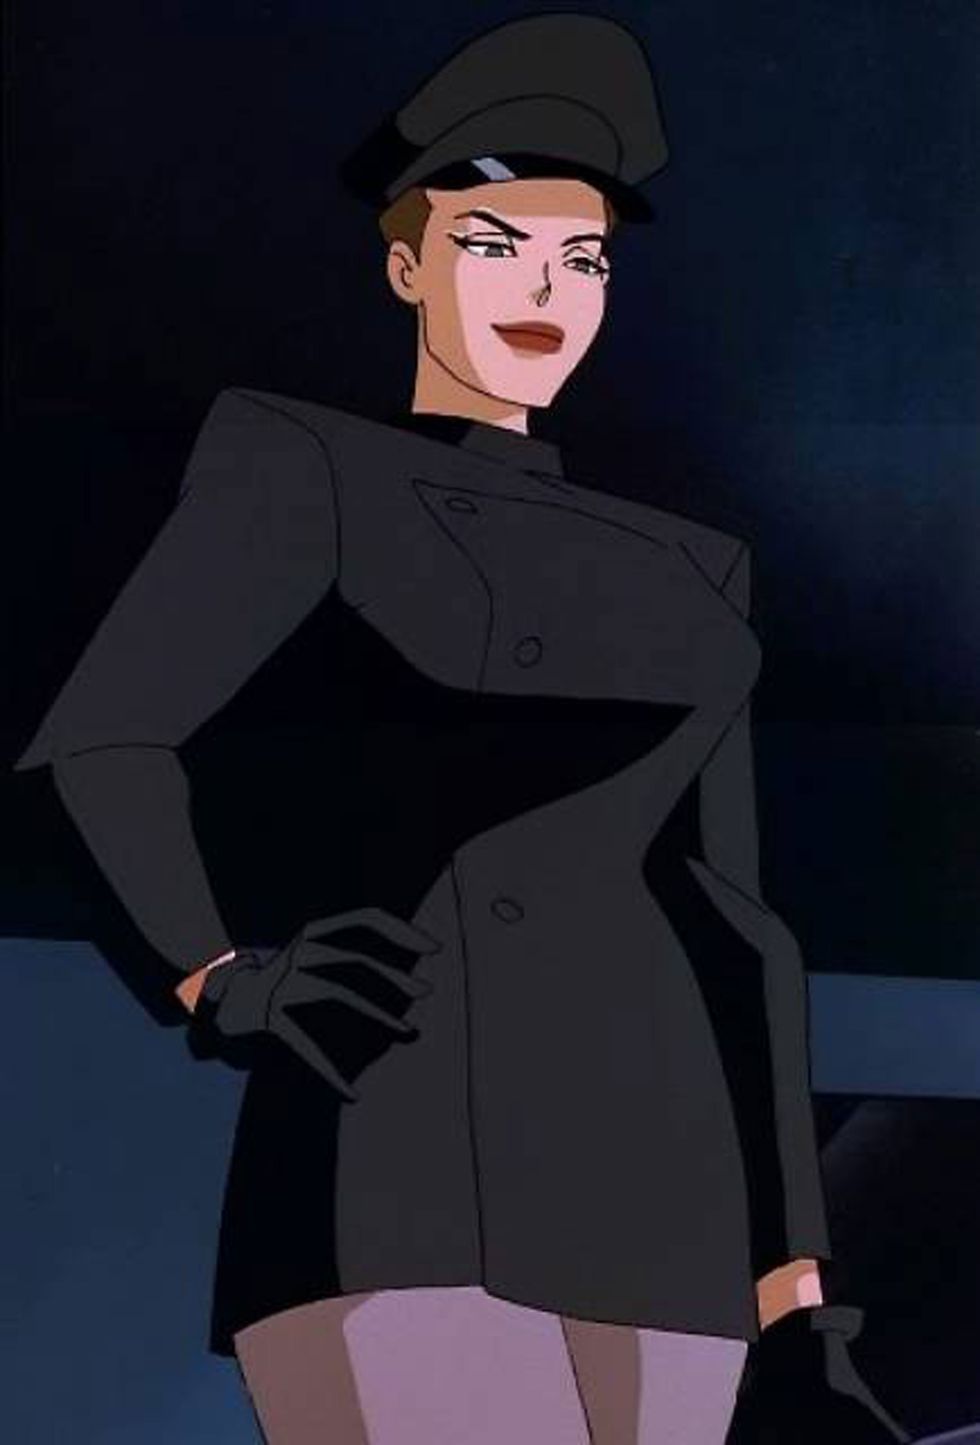 DC Comics character Mercy Graves, July 2018